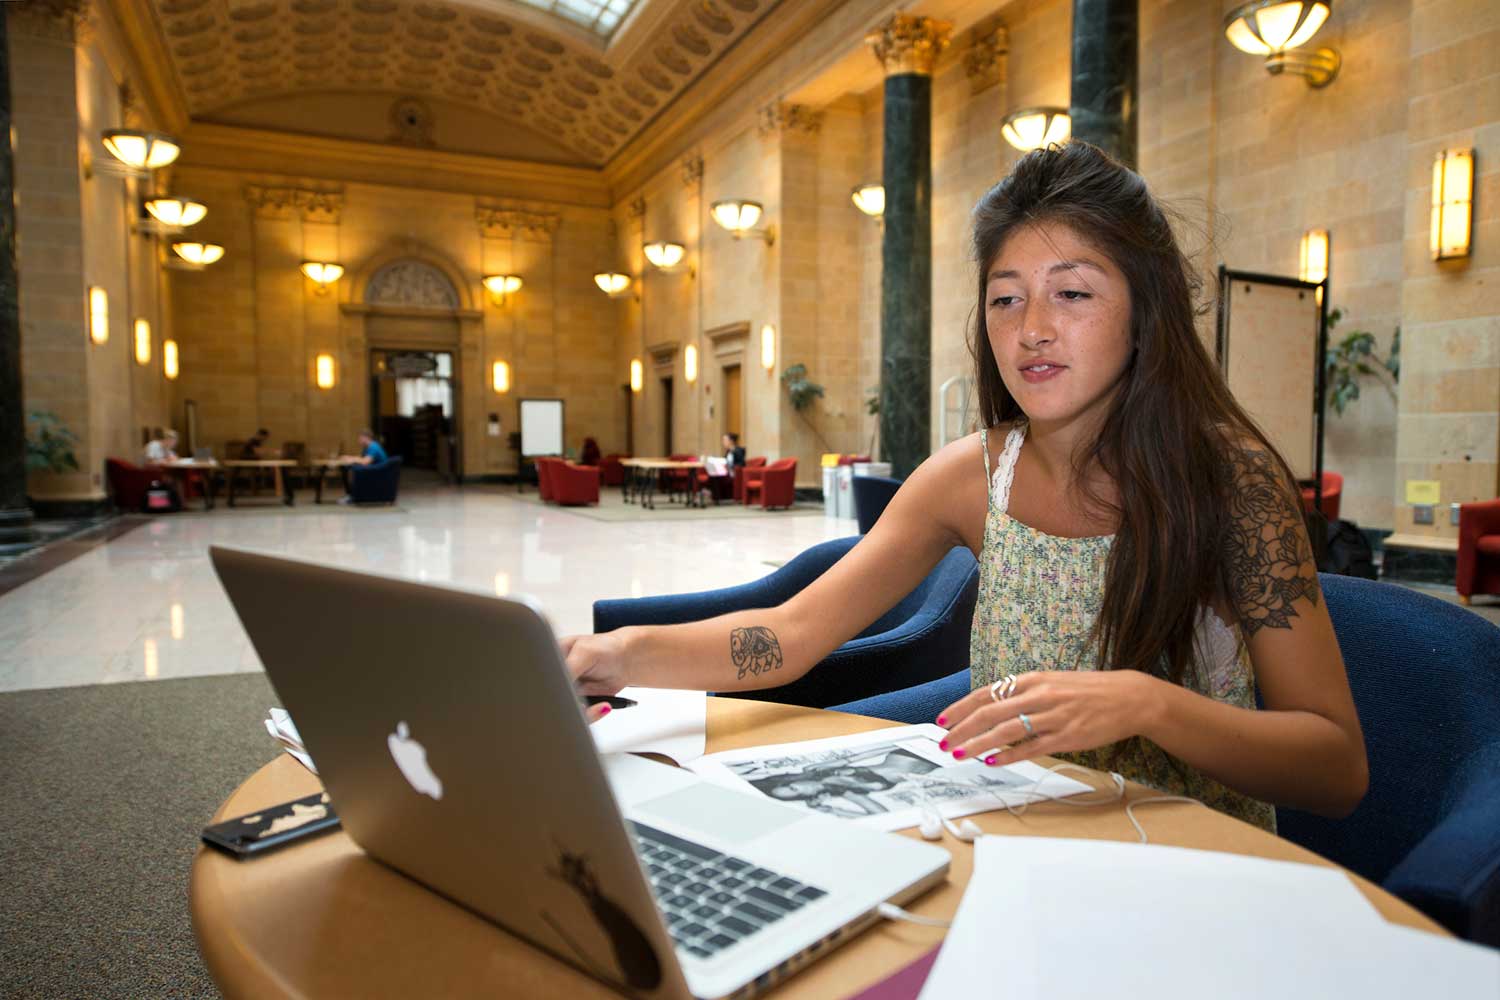 A student studies at table with a laptop computer inside Walter Library's Great Hall.